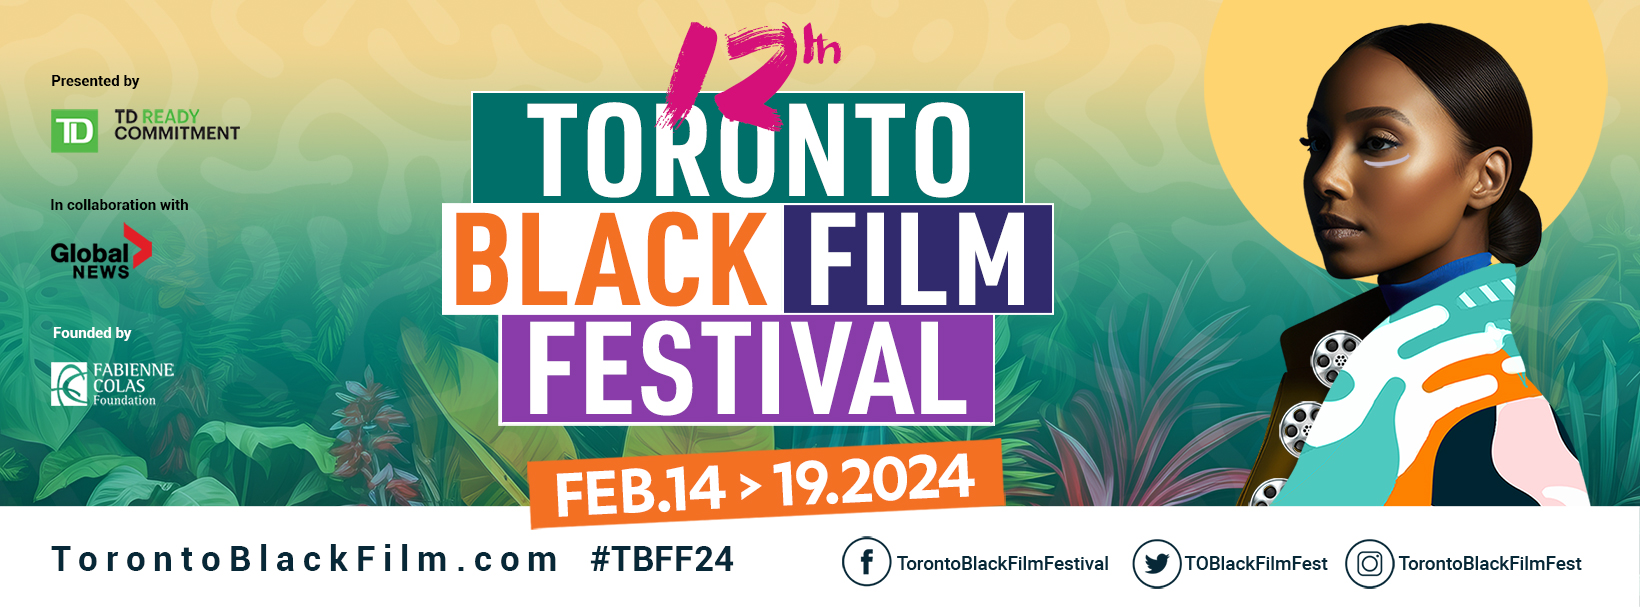 TORONTO BLACK FILM FESTIVAL HONOURS  TRAILBLAZING ACTRESS PAM GRIER + 80 FILMS FROM 20 COUNTRIES!